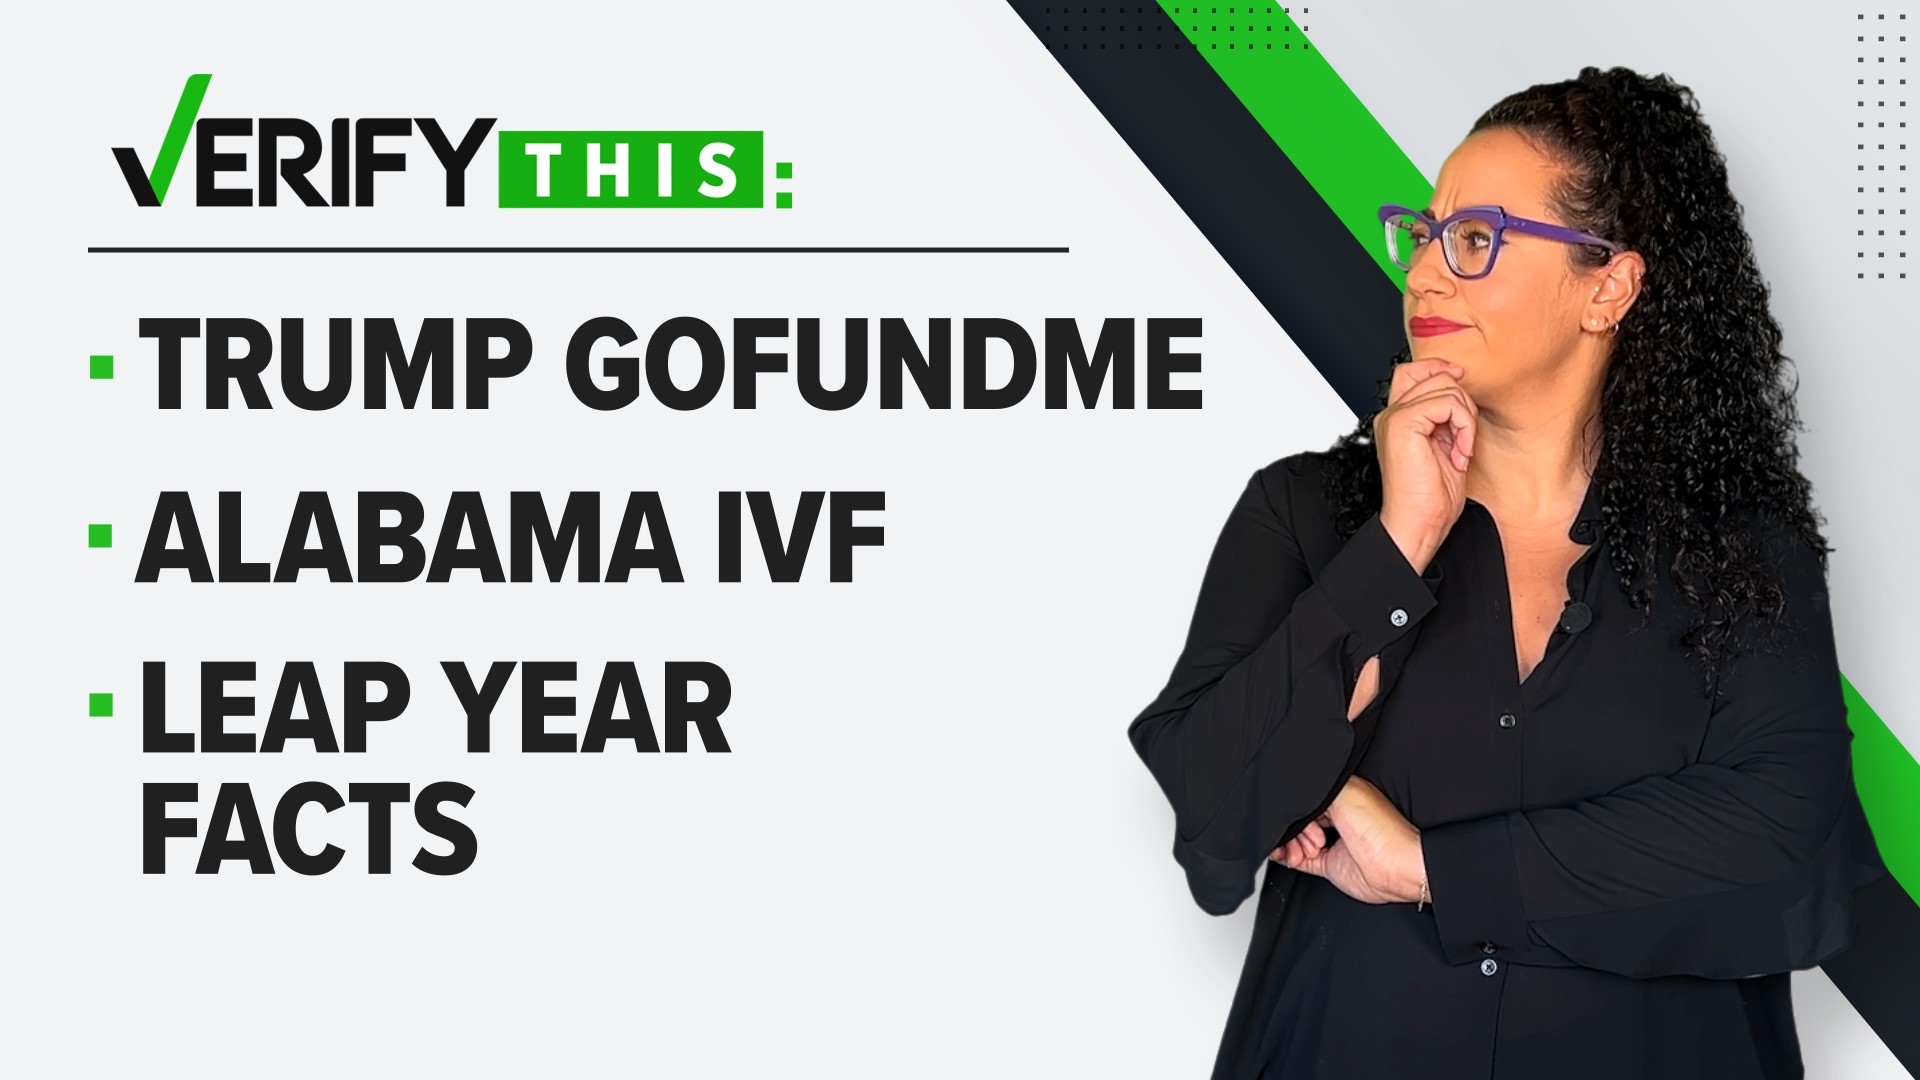 In this week's episode, we verify if Trump can crowdfund to pay off his fines, share some fun leap year facts and clarify some facts about the Alabama ruling on IVF